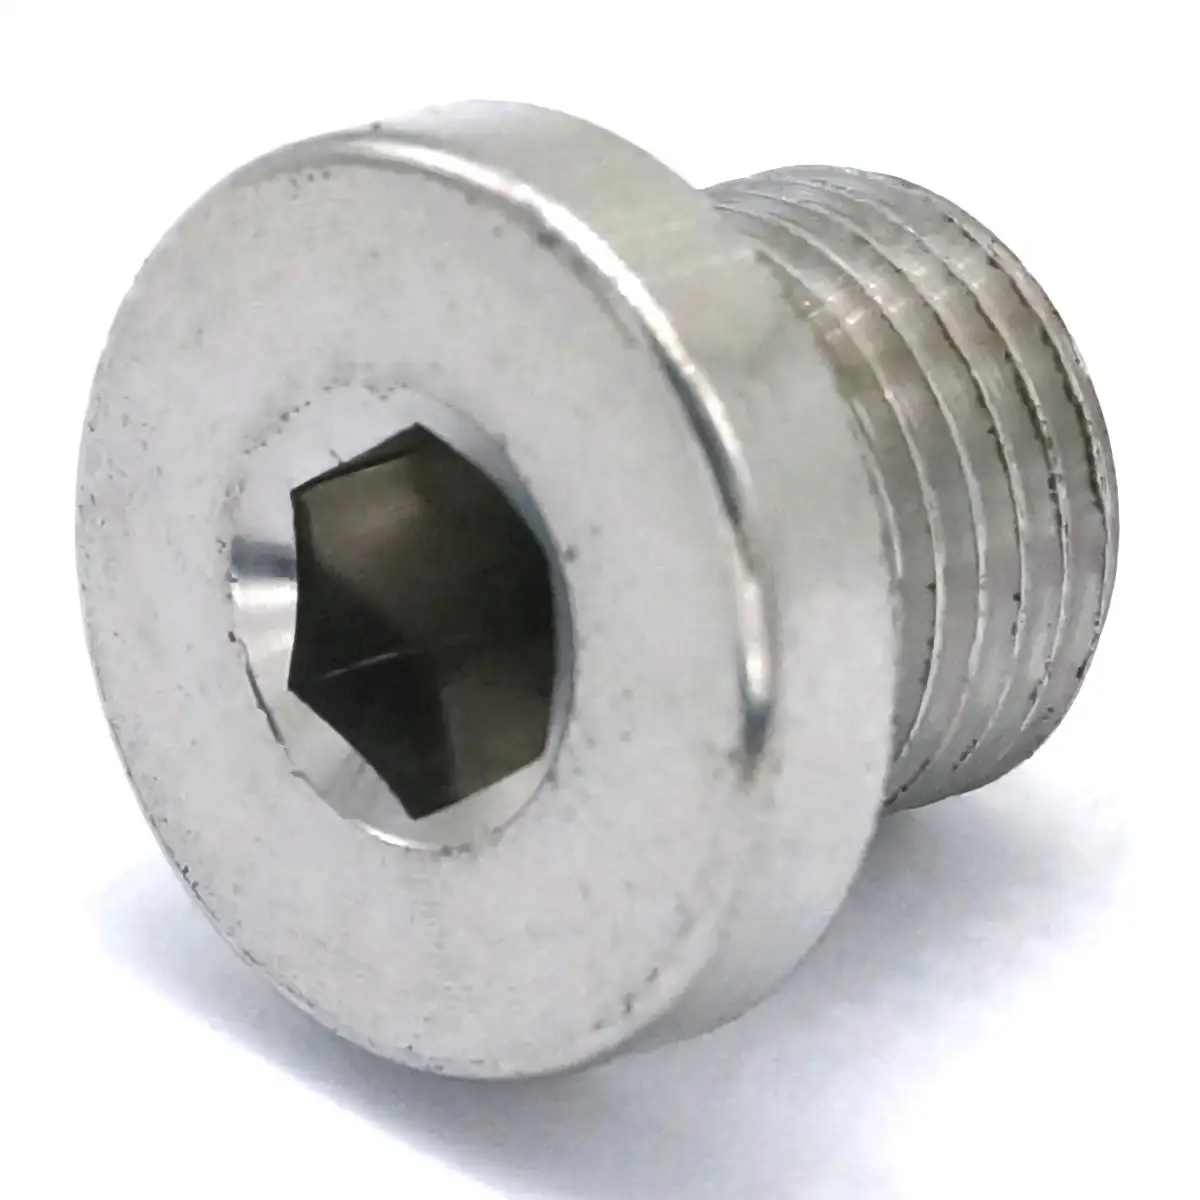 Details about   1/4" BSP bspp Male Stainless Steel Countersunk End Plug Internal Hex Head Socket 